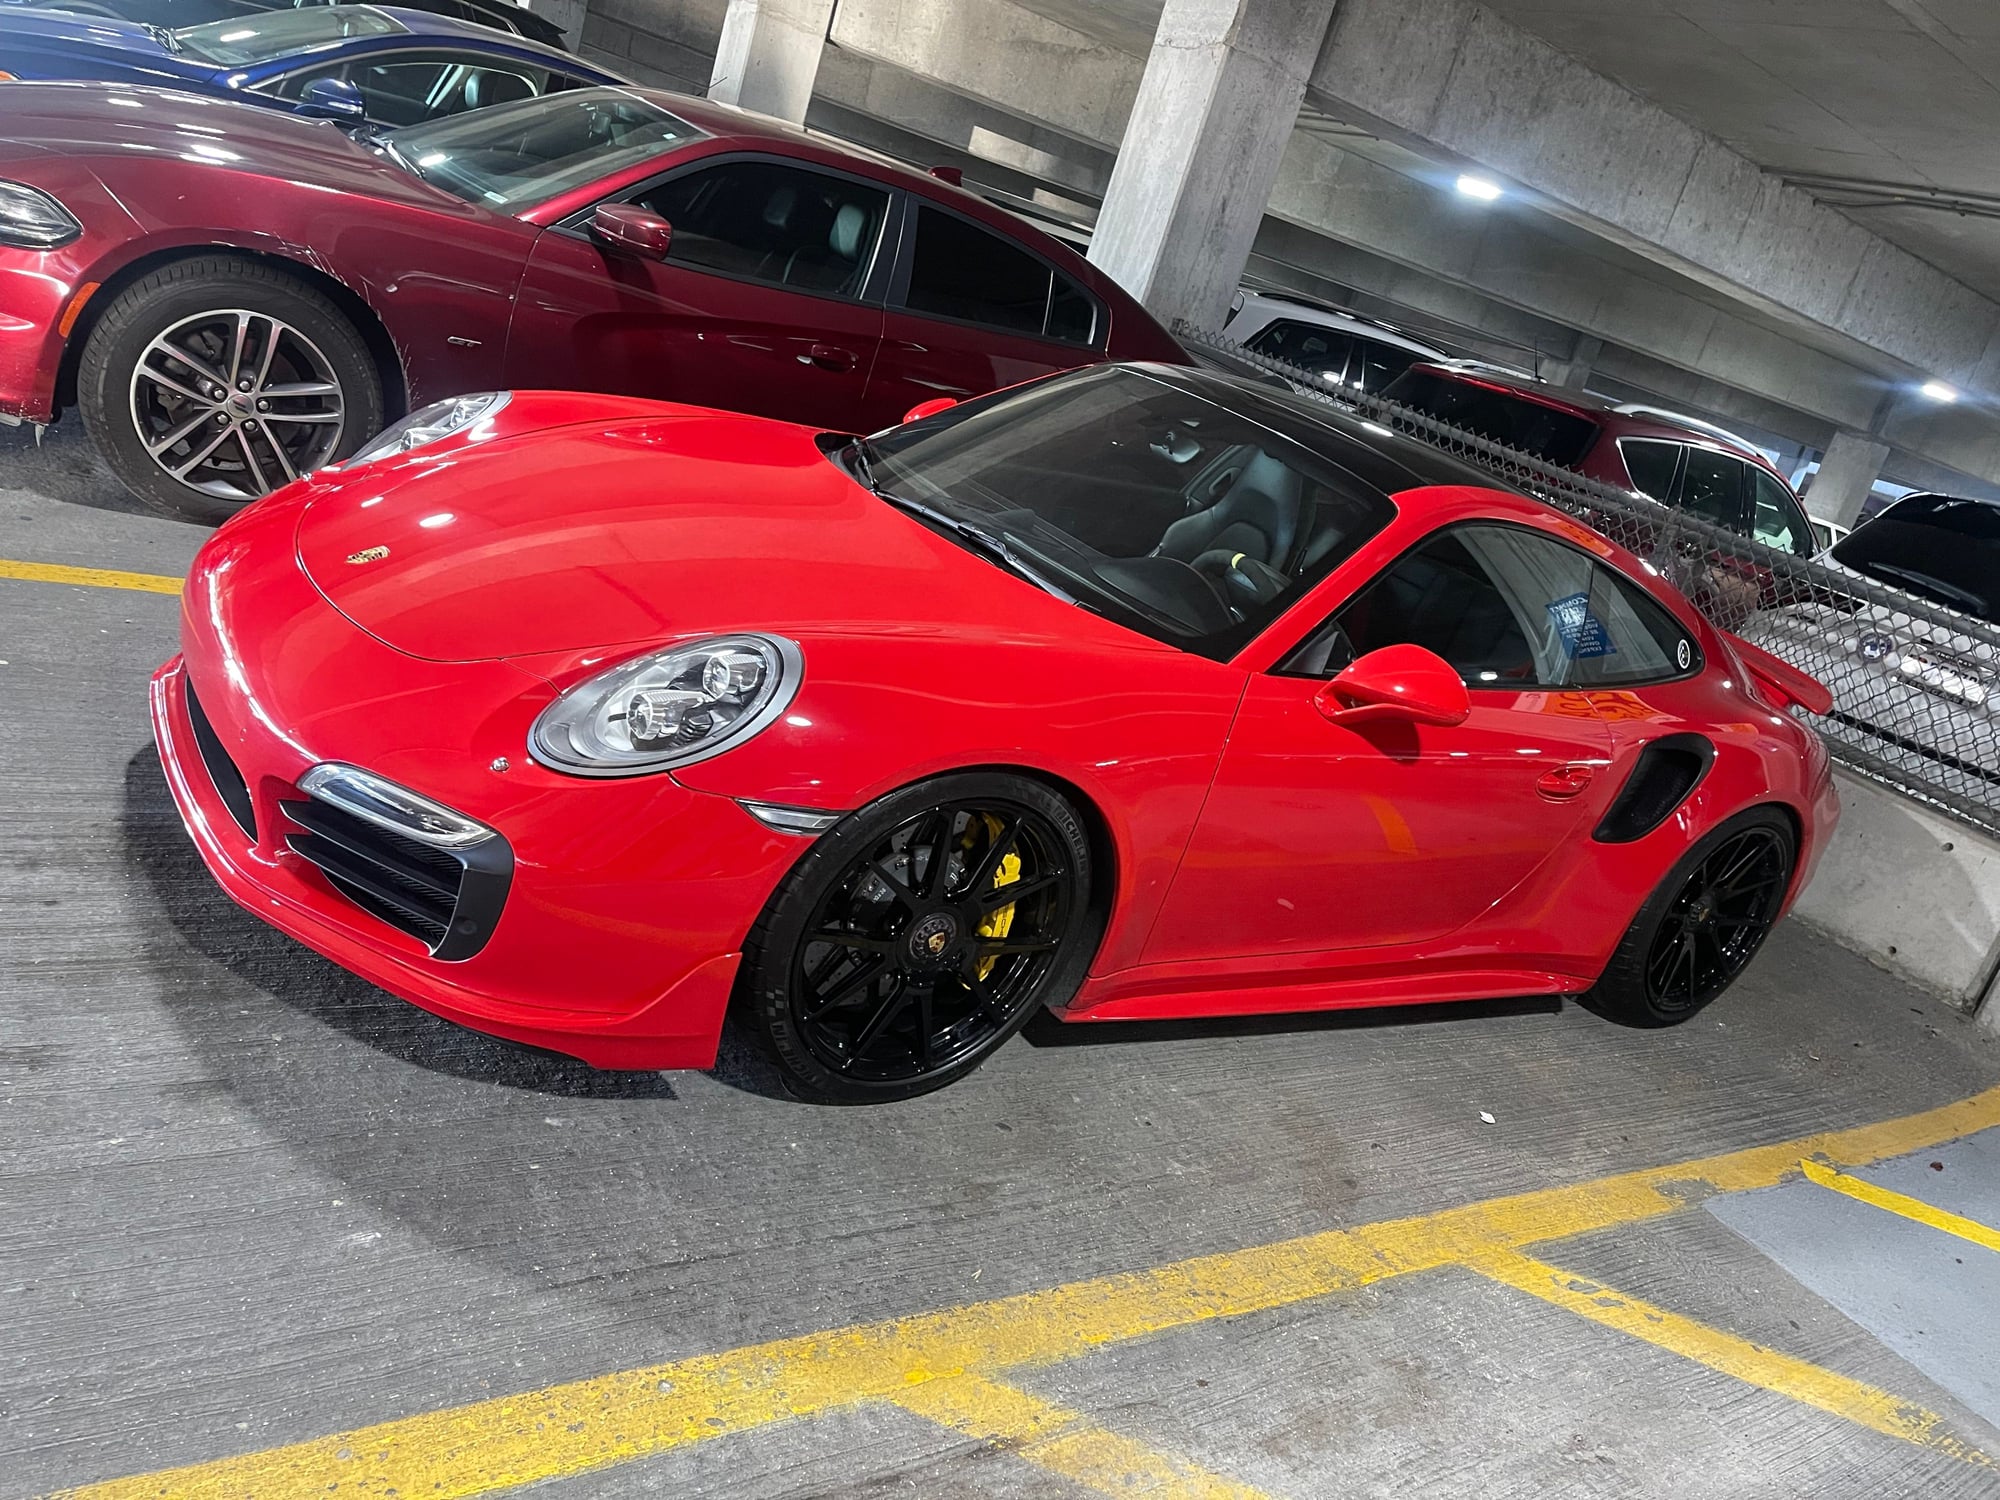 2014 Porsche 911 -  - Used - VIN WPOAD2A99ES167745 - 100,000 Miles - 6 cyl - AWD - Automatic - Coupe - Red - Cincinnati, OH 45244, United States